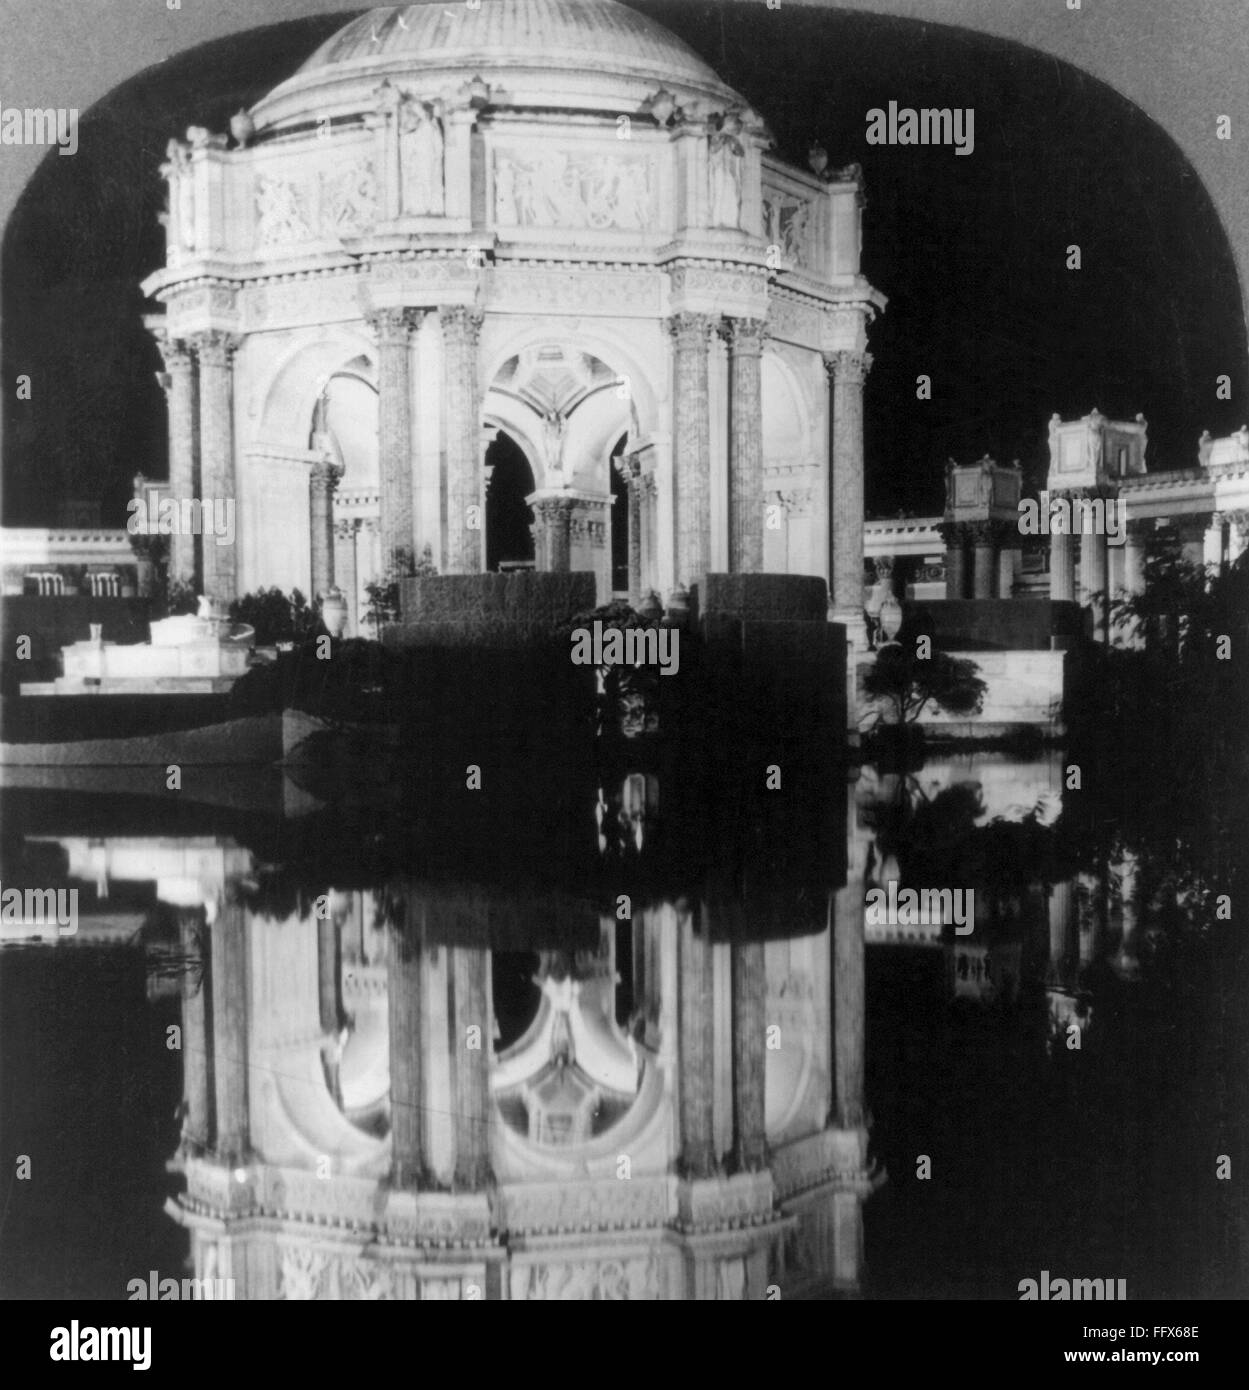 PANAMA-PACIFIC EXPOSITION. /nThe Palace of Fine Arts and Lagoon at the Panama Pacific International Exposition in San Francisco, California. Stereograph, 1915. Stock Photo